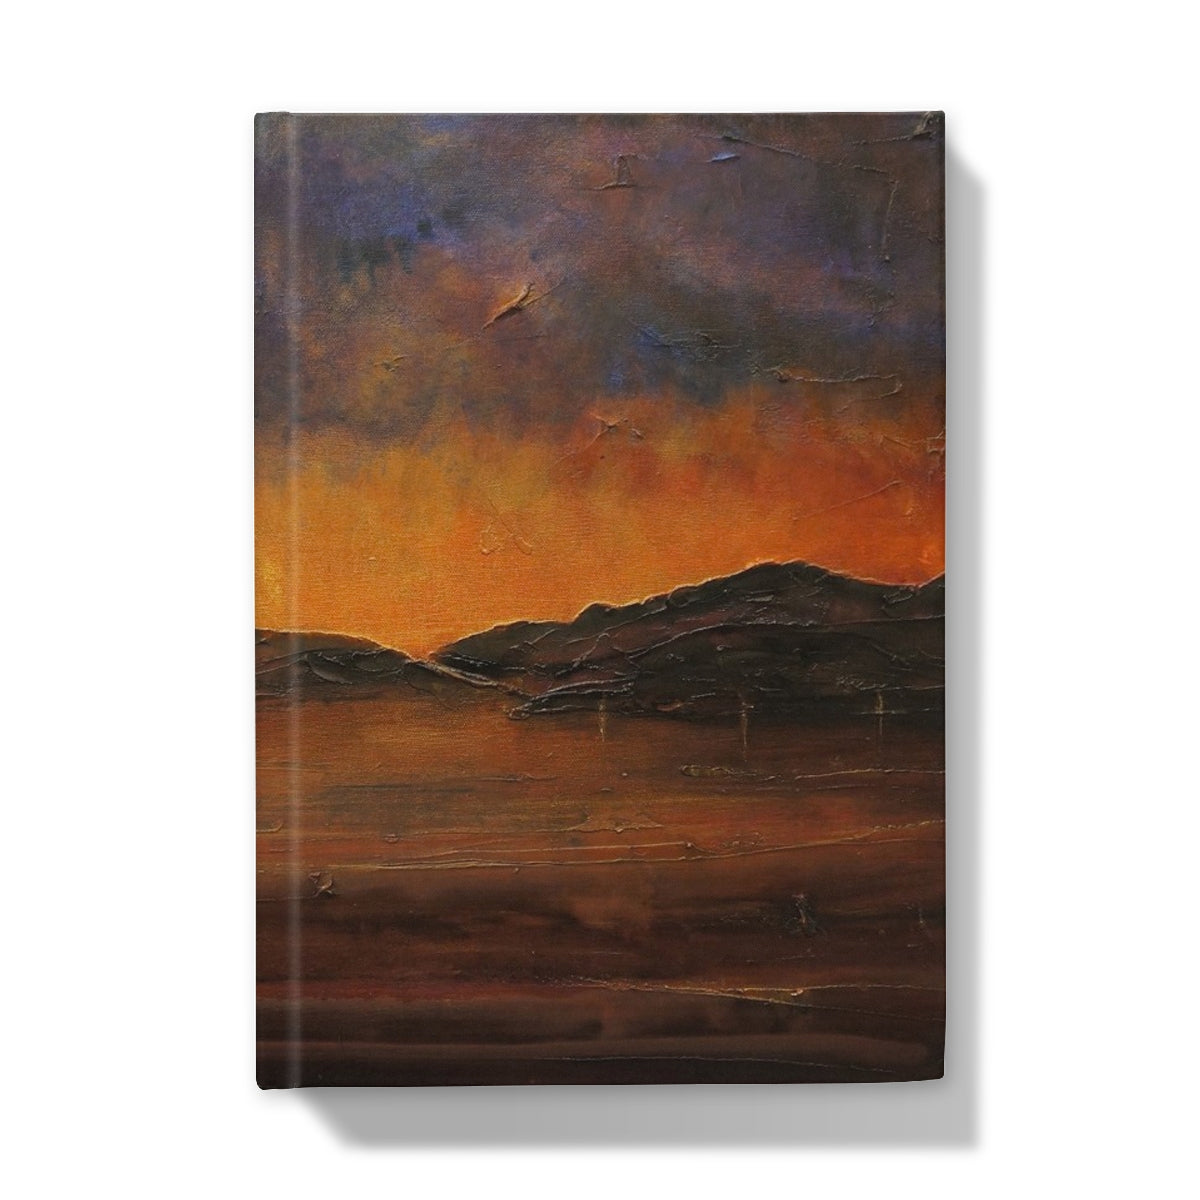 A Brooding Clyde Dusk Art Gifts Hardback Journal-Journals & Notebooks-River Clyde Art Gallery-A5-Plain-Paintings, Prints, Homeware, Art Gifts From Scotland By Scottish Artist Kevin Hunter